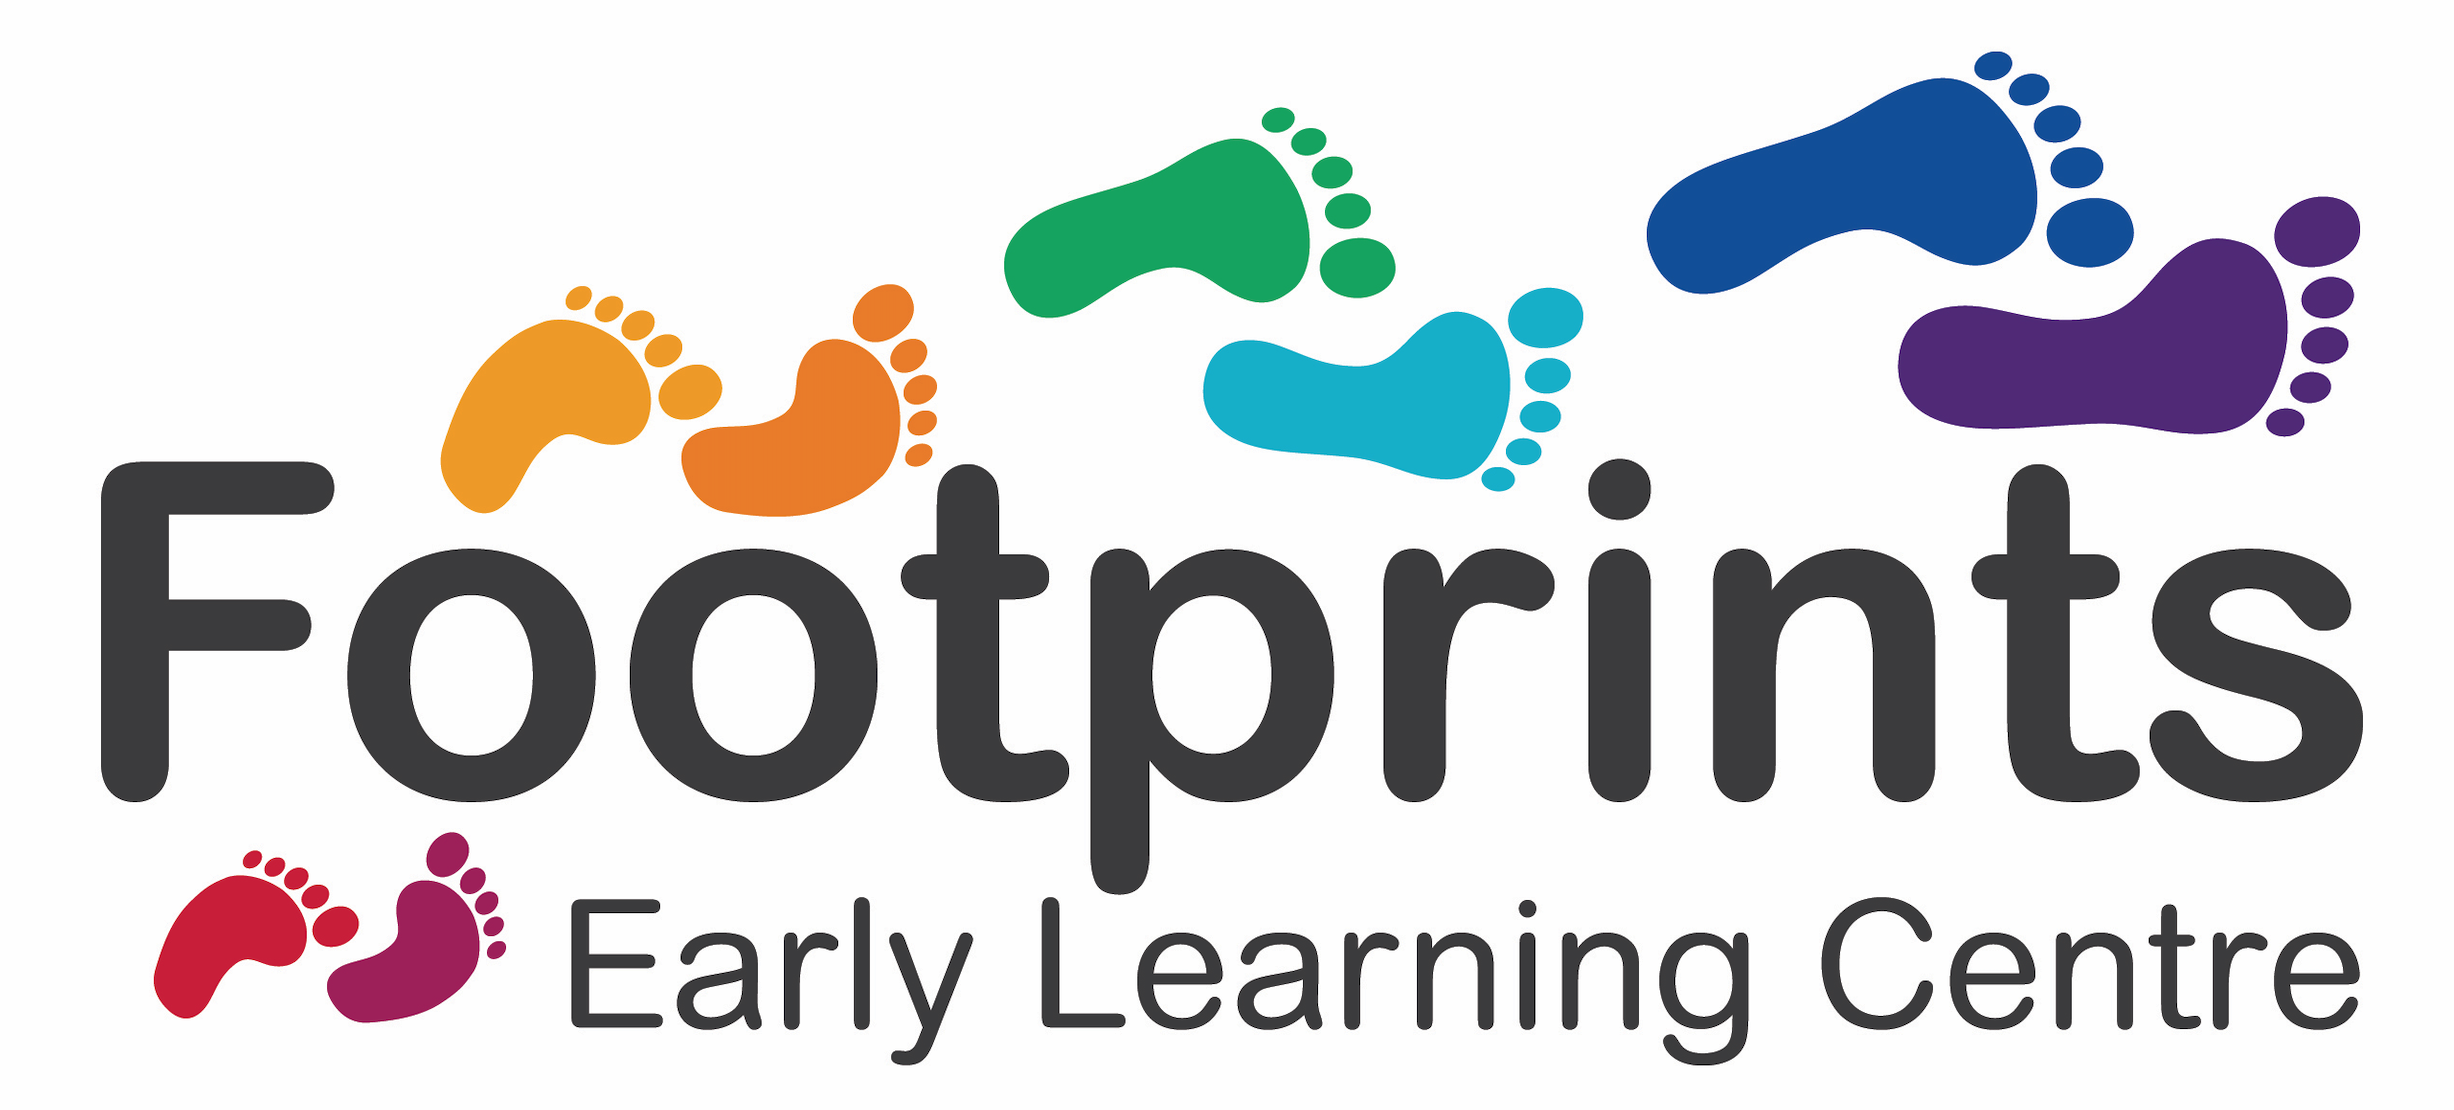 Footprints Early Learning Centre